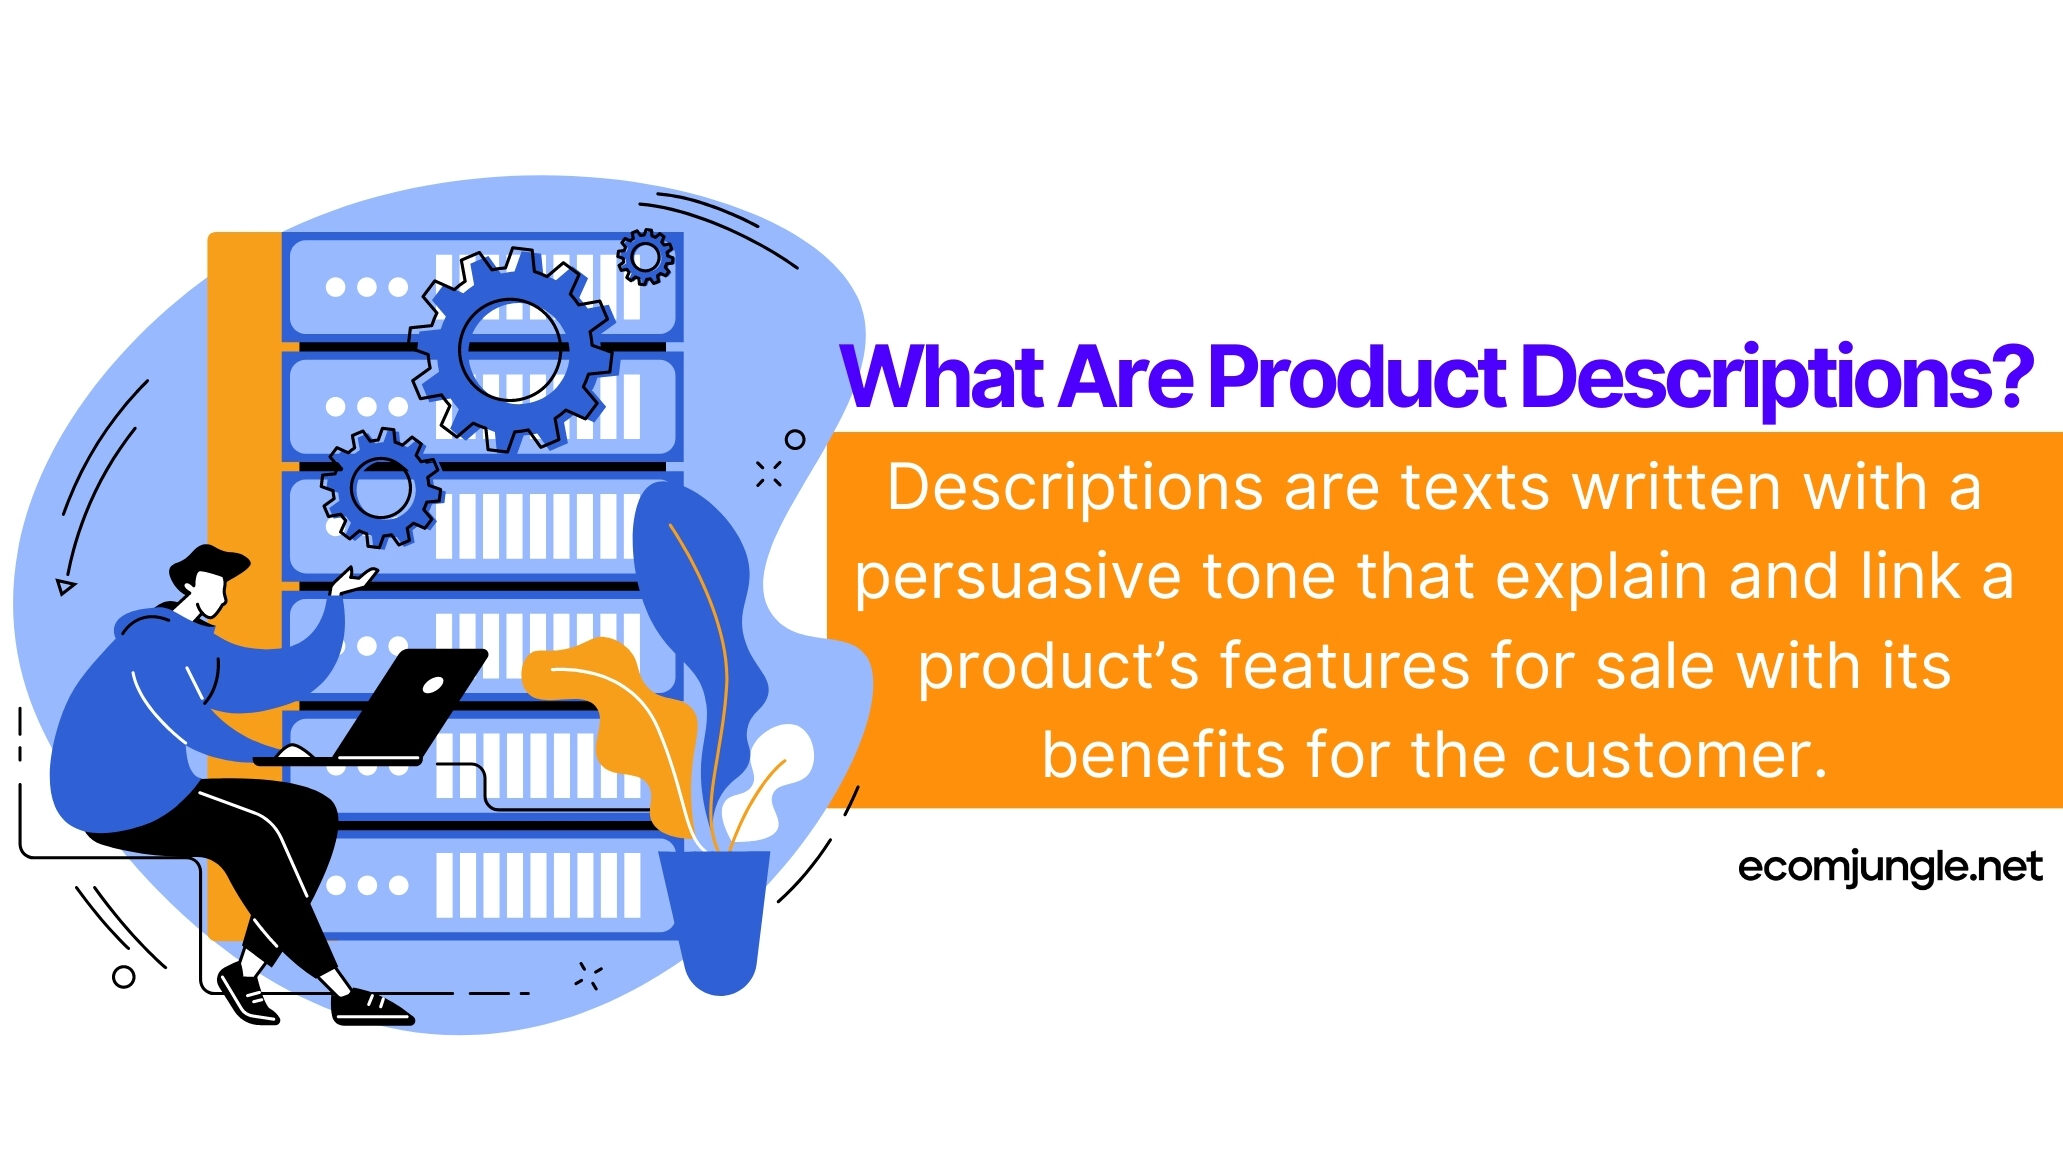 A product description is a form of marketing copy used to describe and explain the benefits of your product. In other words, it provides all the information and details of your product on your ecommerce site.